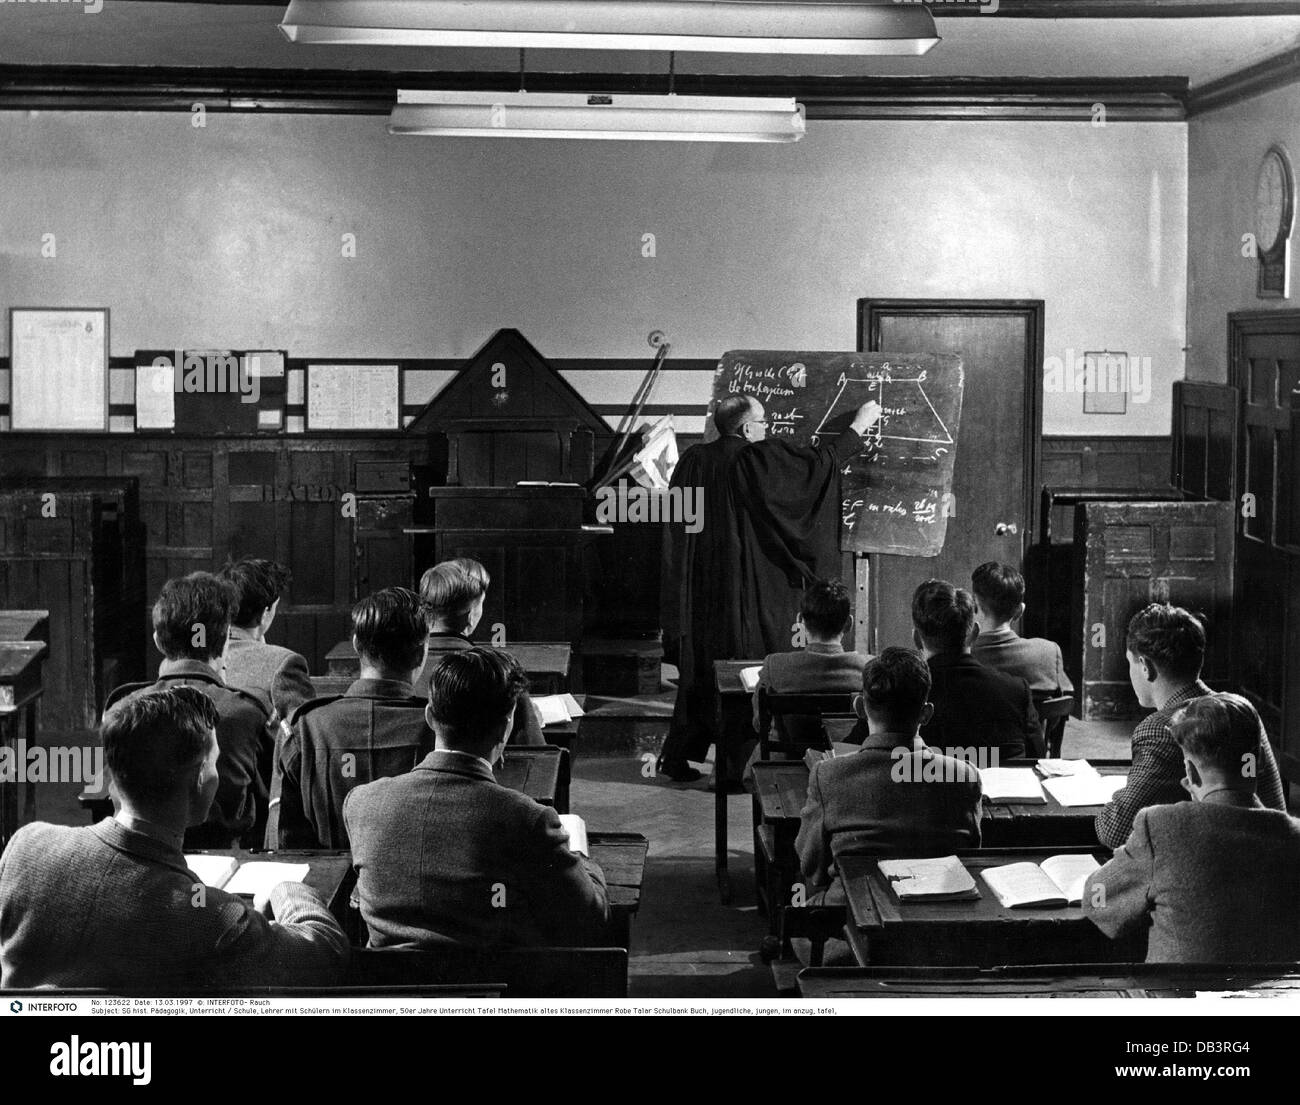 20th century classroom Black and White Stock Photos & Images - Alamy